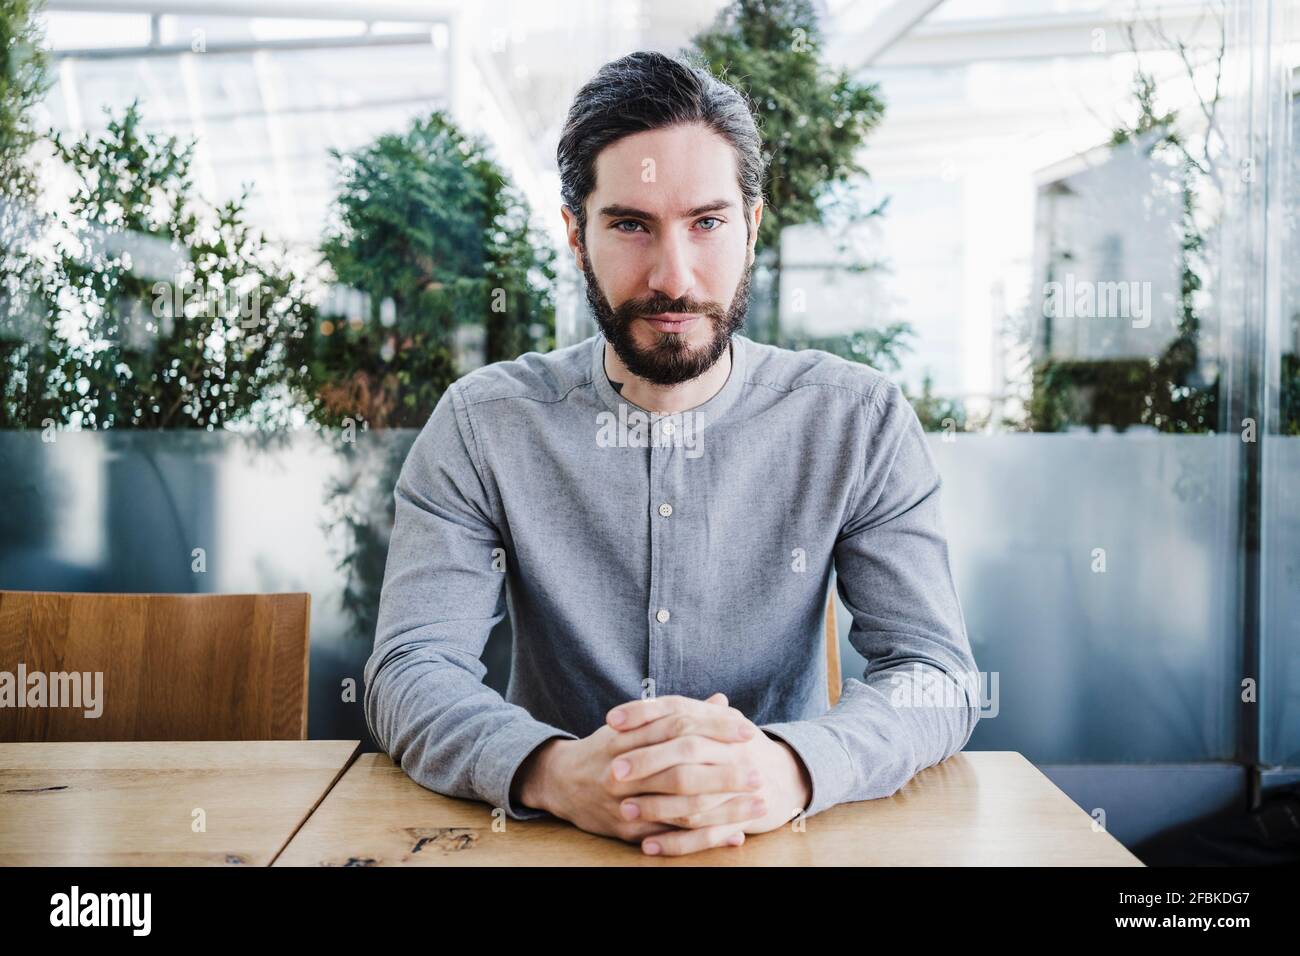 Handsome businessman with gray eyes at work place Stock Photo